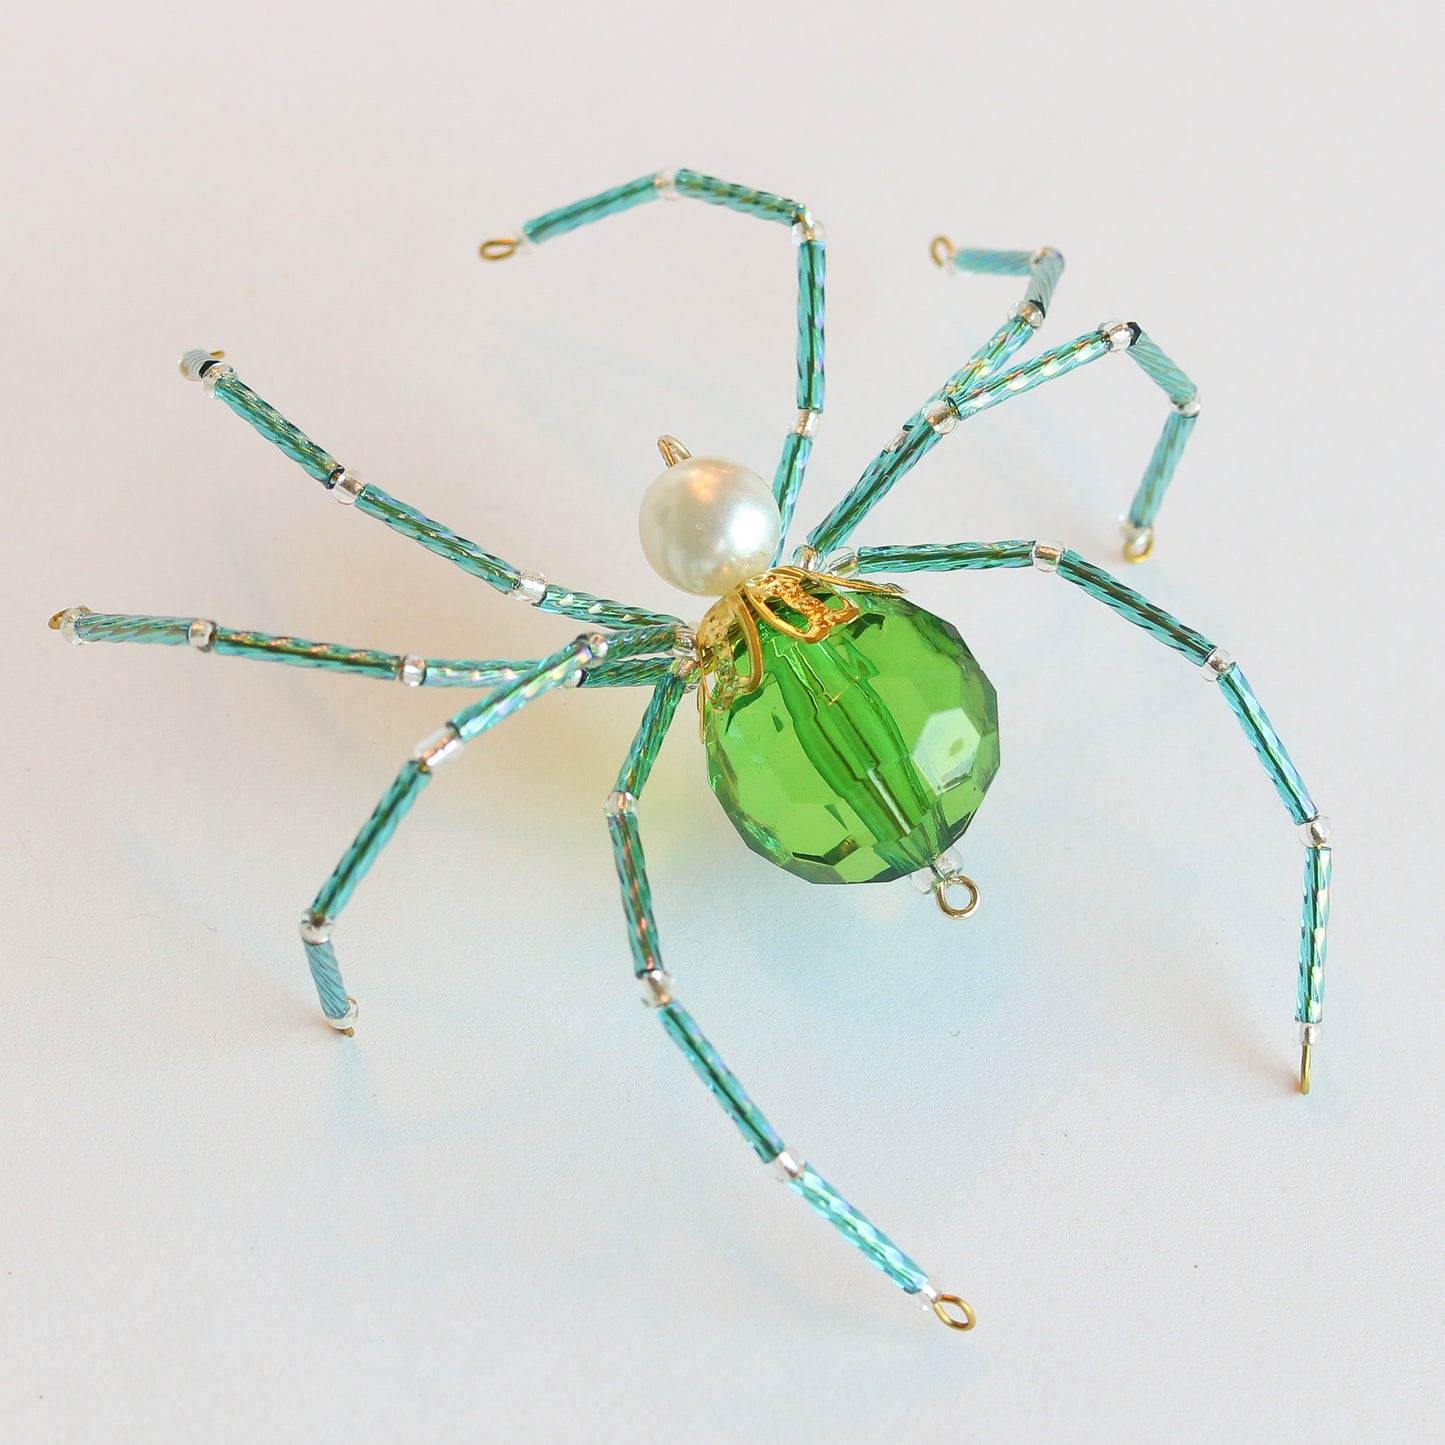 Beaded Spider Christmas Ornament Green and Teal (One of a Kind)